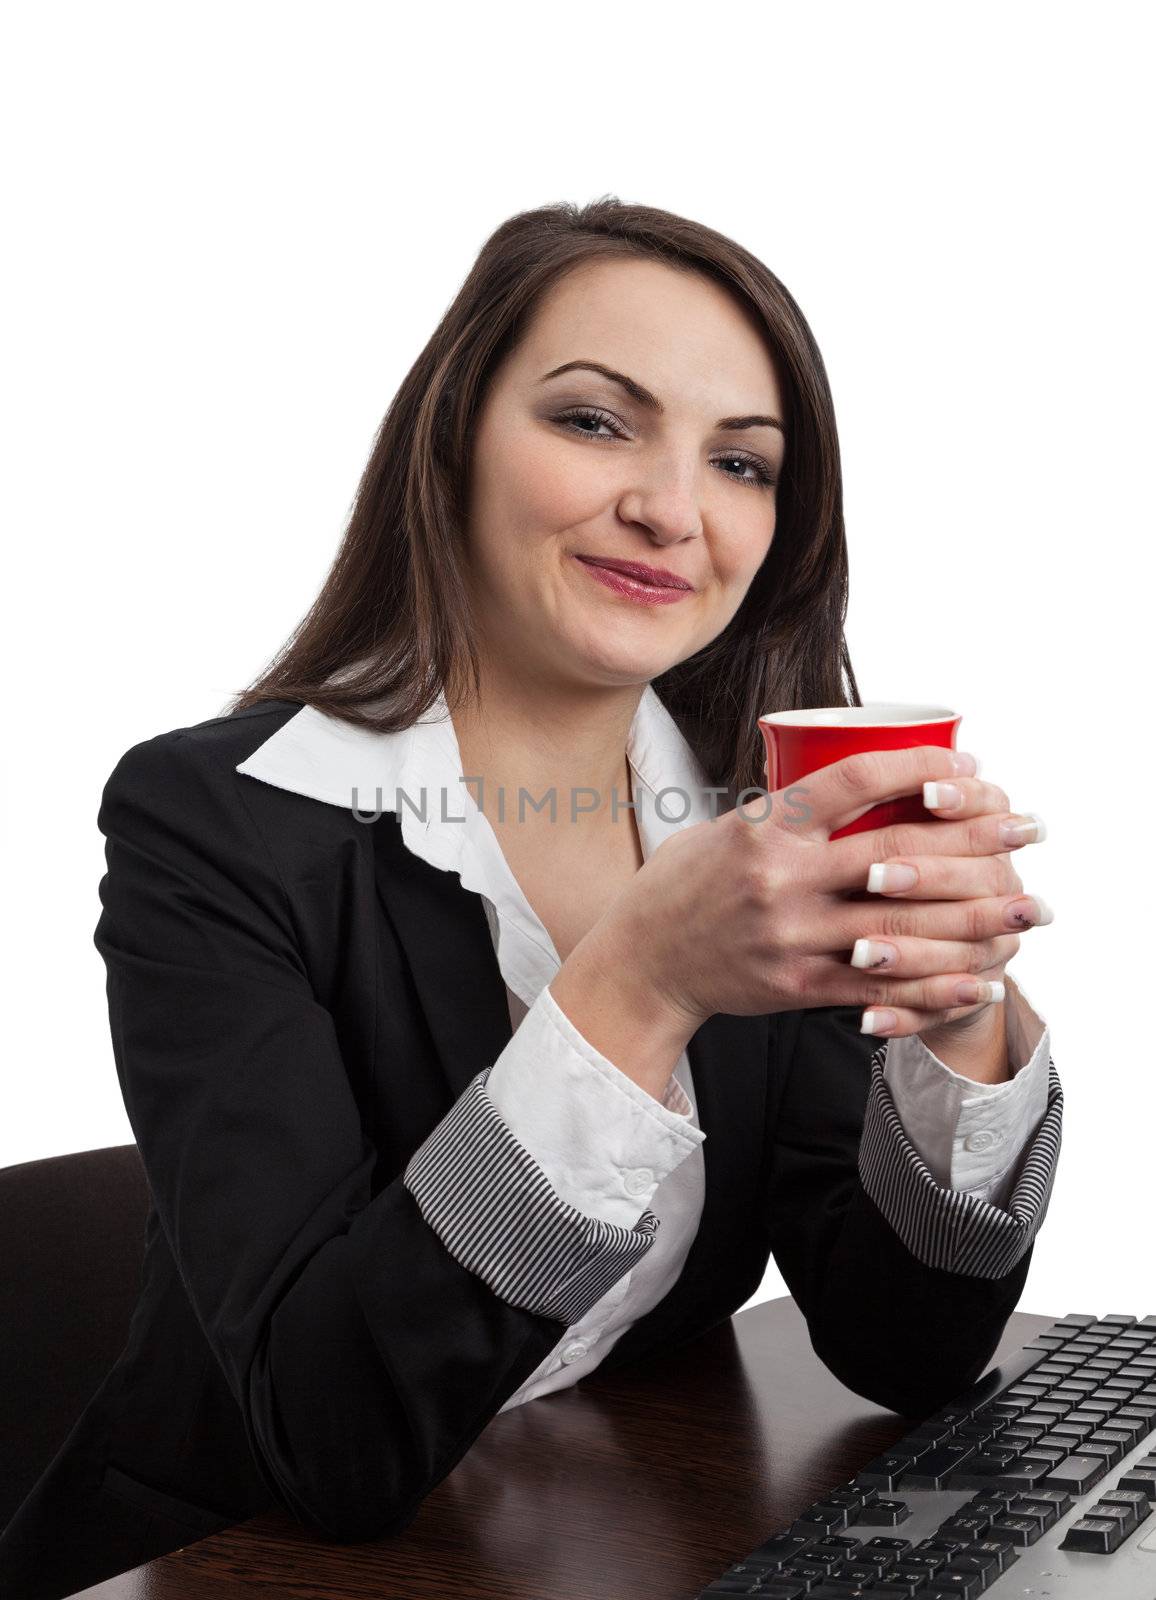 Portrait of a smilling young woman holding a red cup in her hands at the office, isolated against a white background.